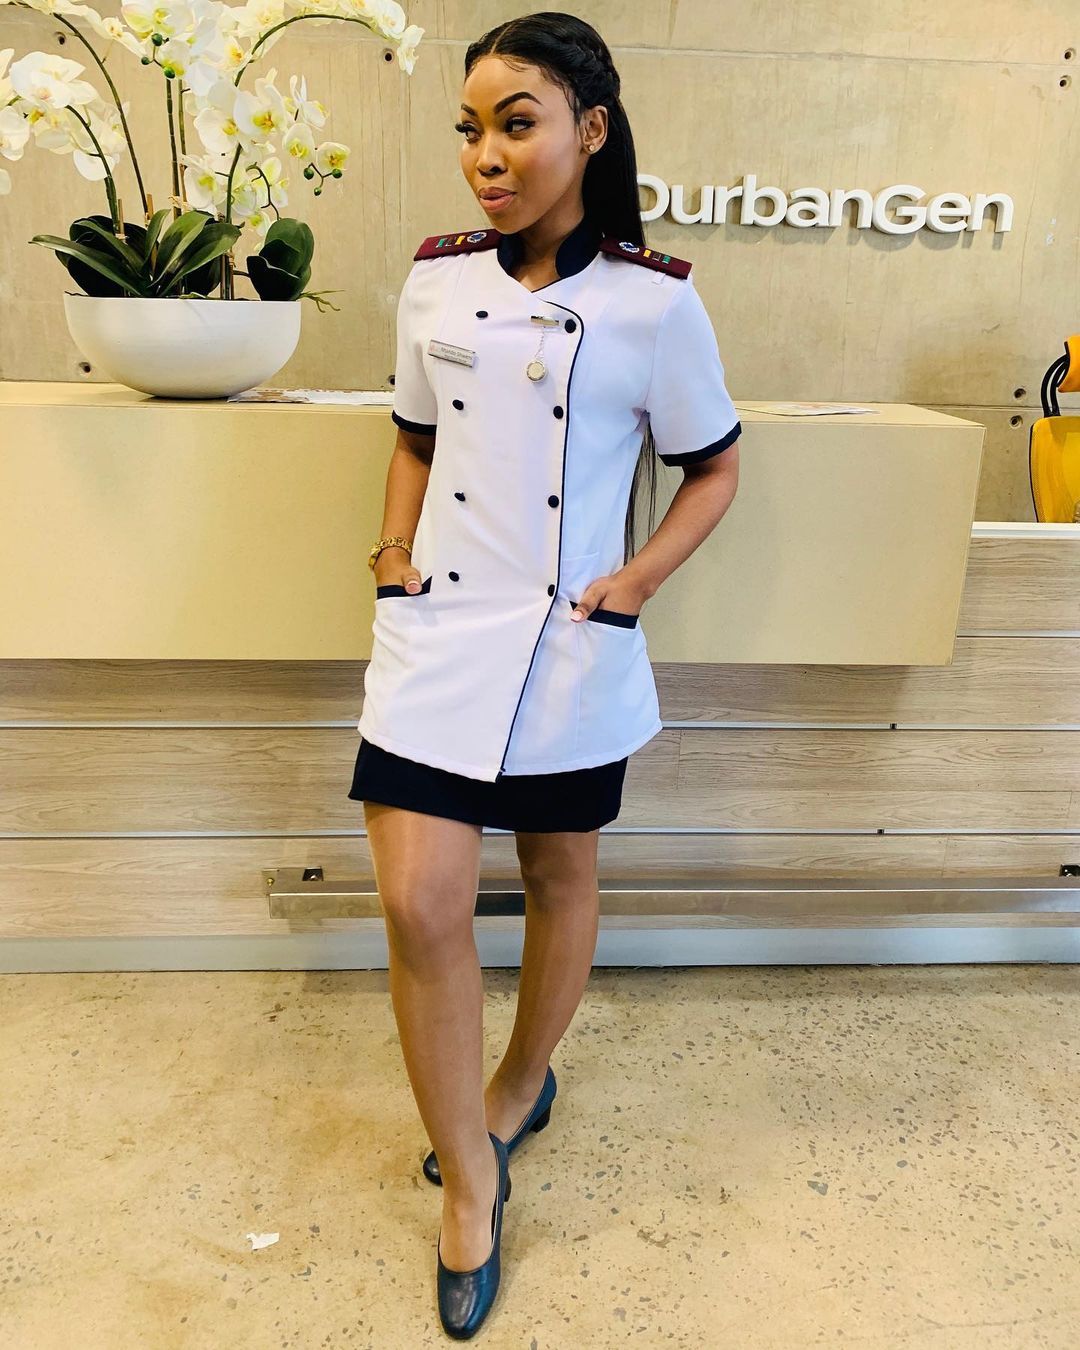 Real life facts about Nurse Shweni from Durban Gen